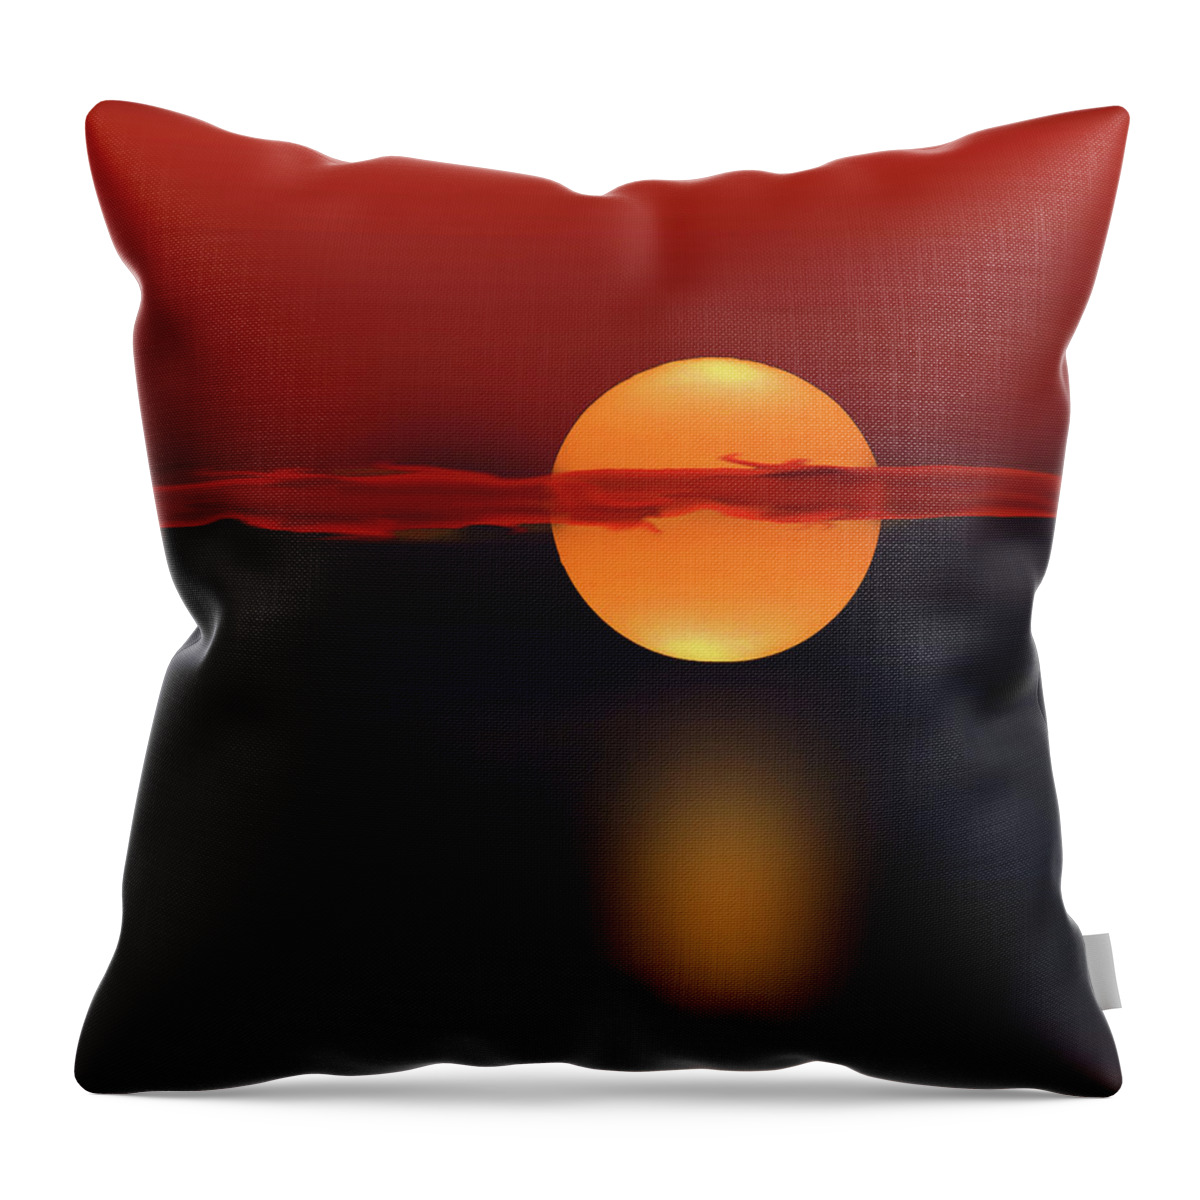 Abstract Throw Pillow featuring the digital art Sun on Red and Blue by Deborah Smith